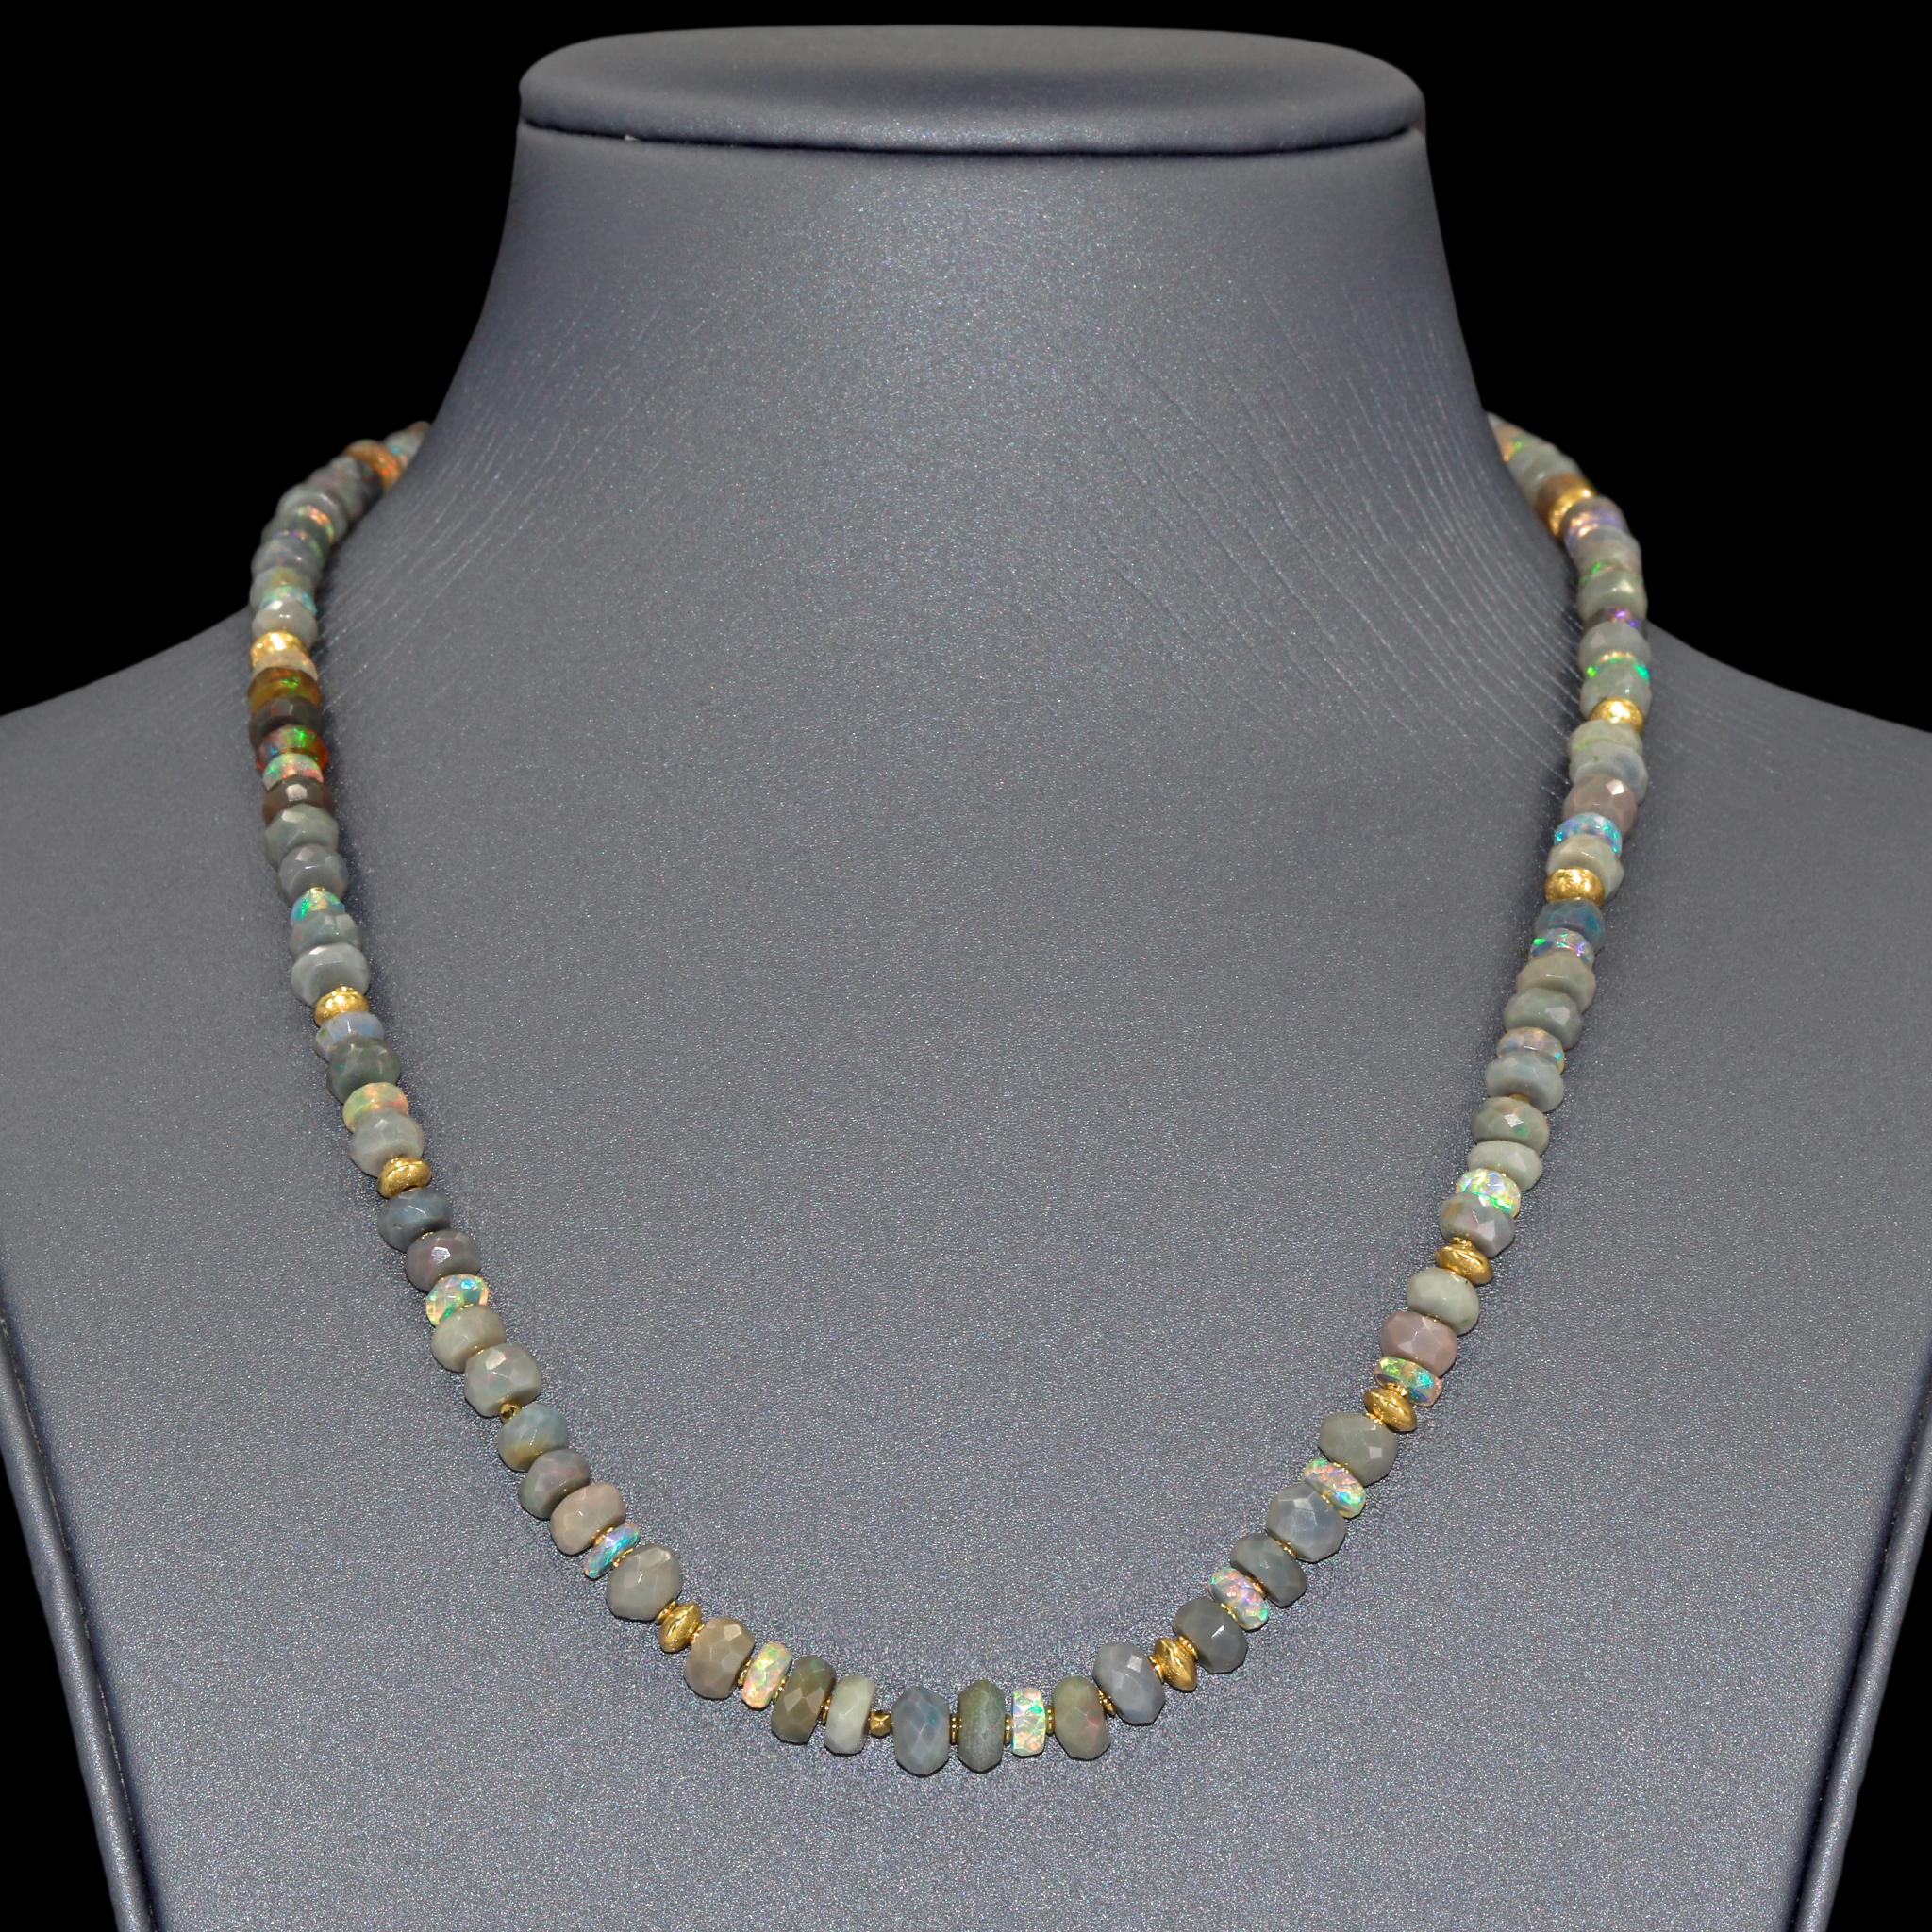 Opal Necklace hand-fabricated by award winning jewelry artist Barbara Heinrich featuring a stunning assortment of Australian and Ethiopian faceted opal rondels totaling 48.50 carats, each individually flanked by assorted 18k yellow gold beads and